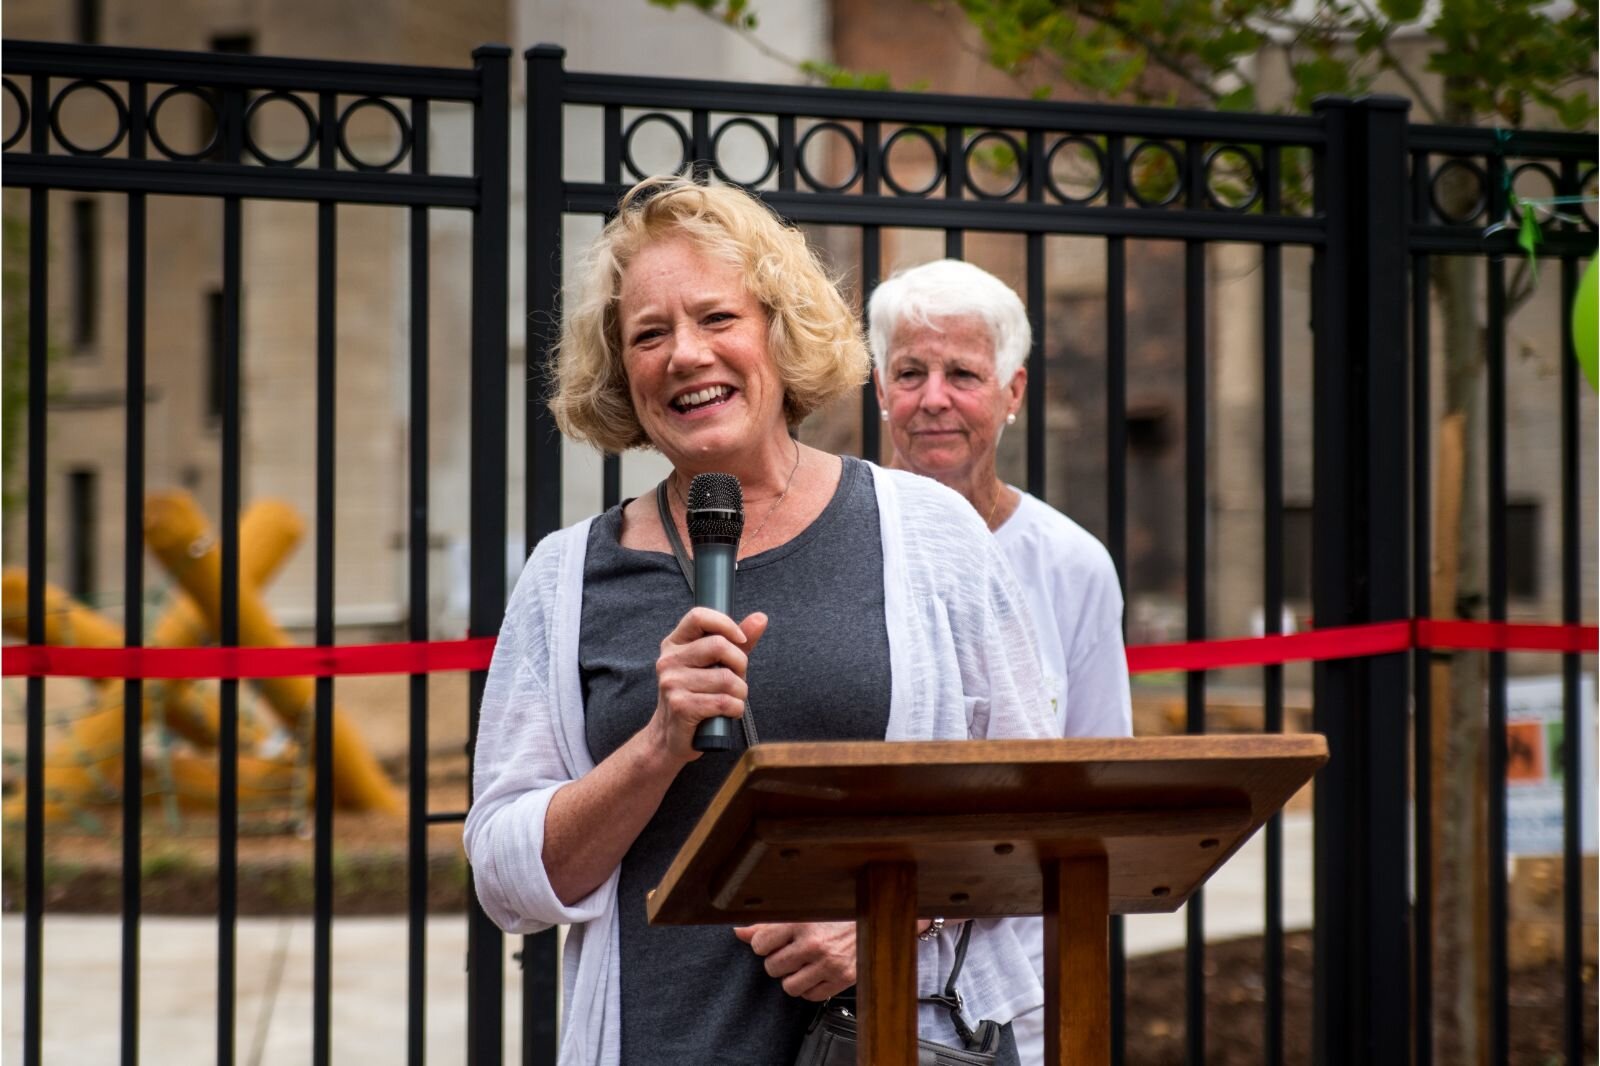  Sandy Bleisener, Principal at OCBA Landscape Architects, offers remarks at the grand opening of Children’s Nature Playscape at Bronson Park.